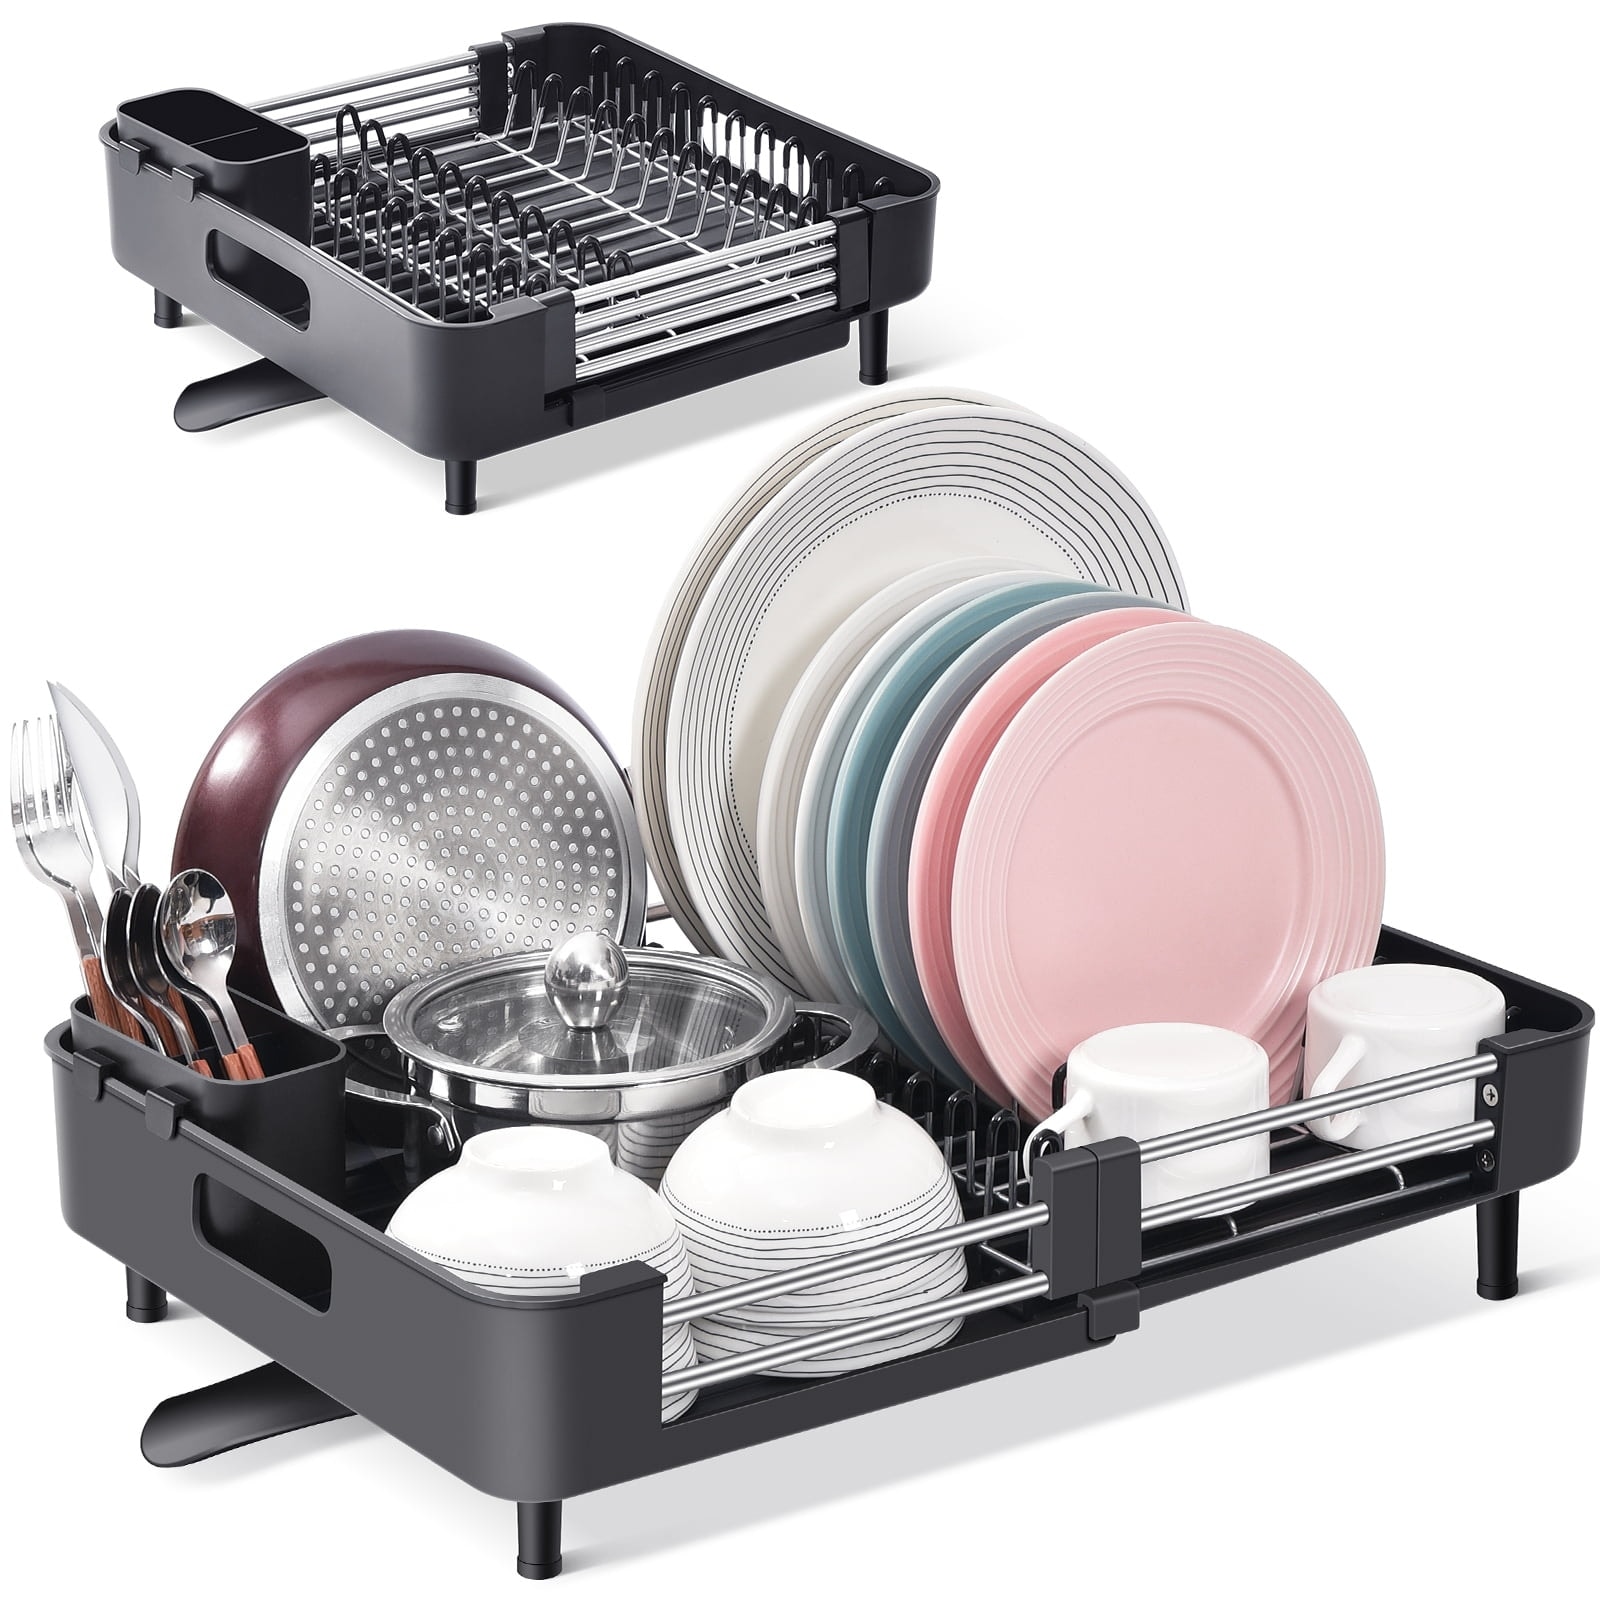 Sabatier Expandable Stainless Steel Dish Rack with Rust-Resistant Soft Coated Wires and Bi-Directional Spout - Black